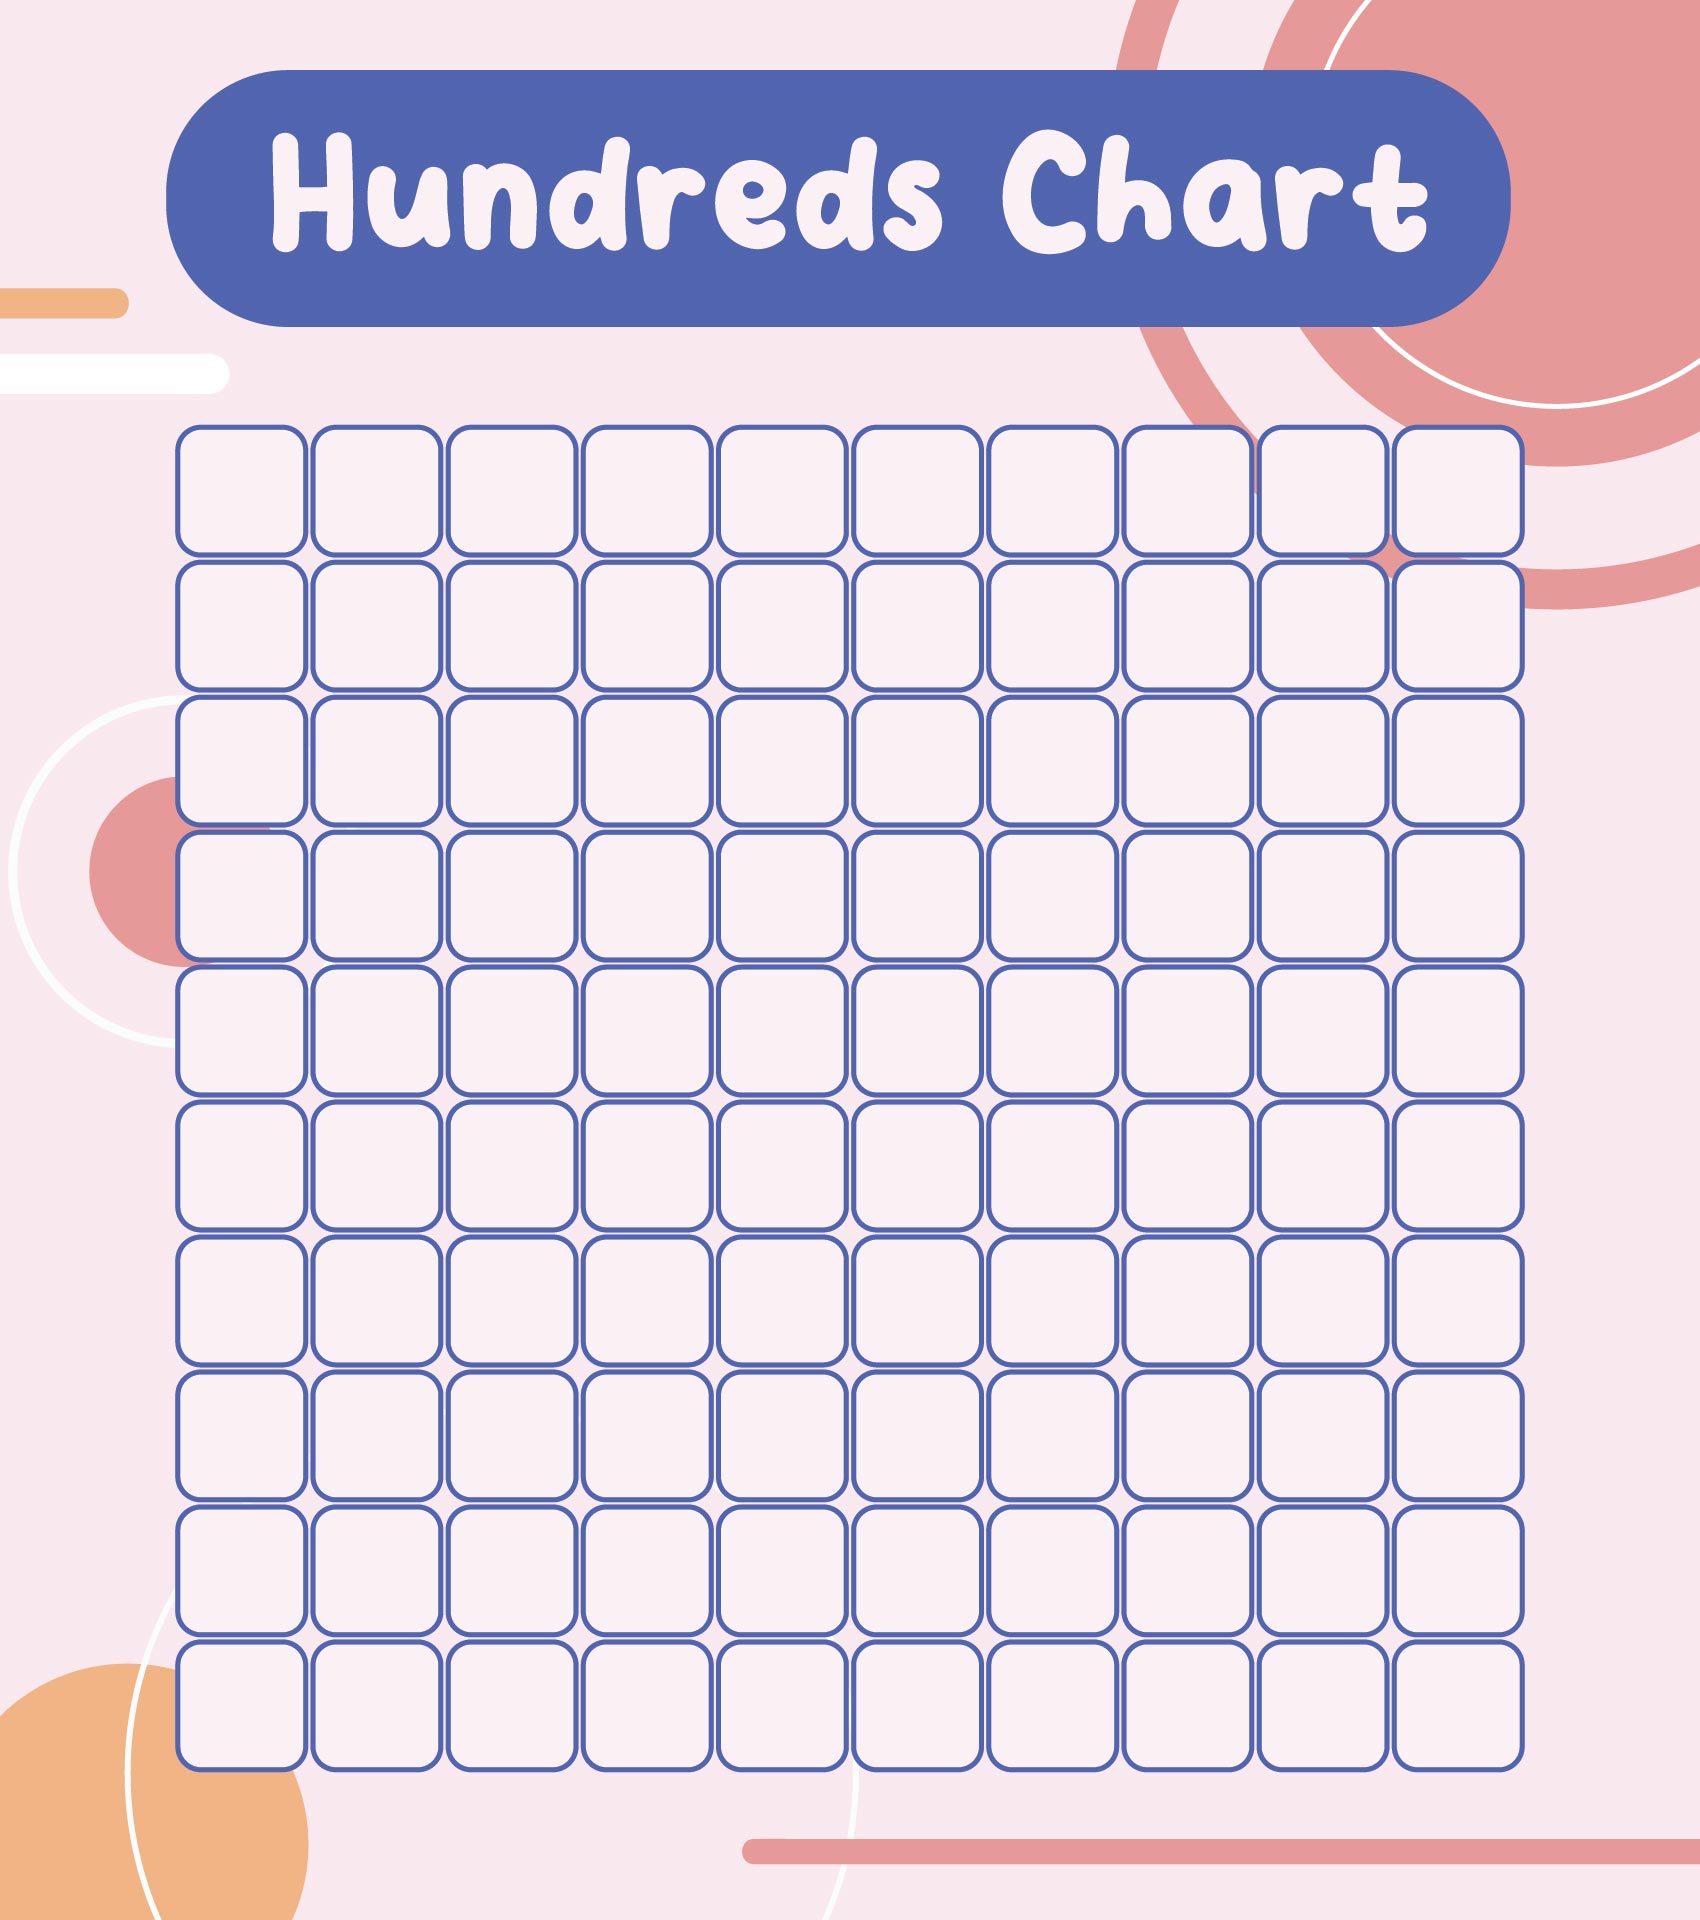 100-square-chart-free-download-little-graphics